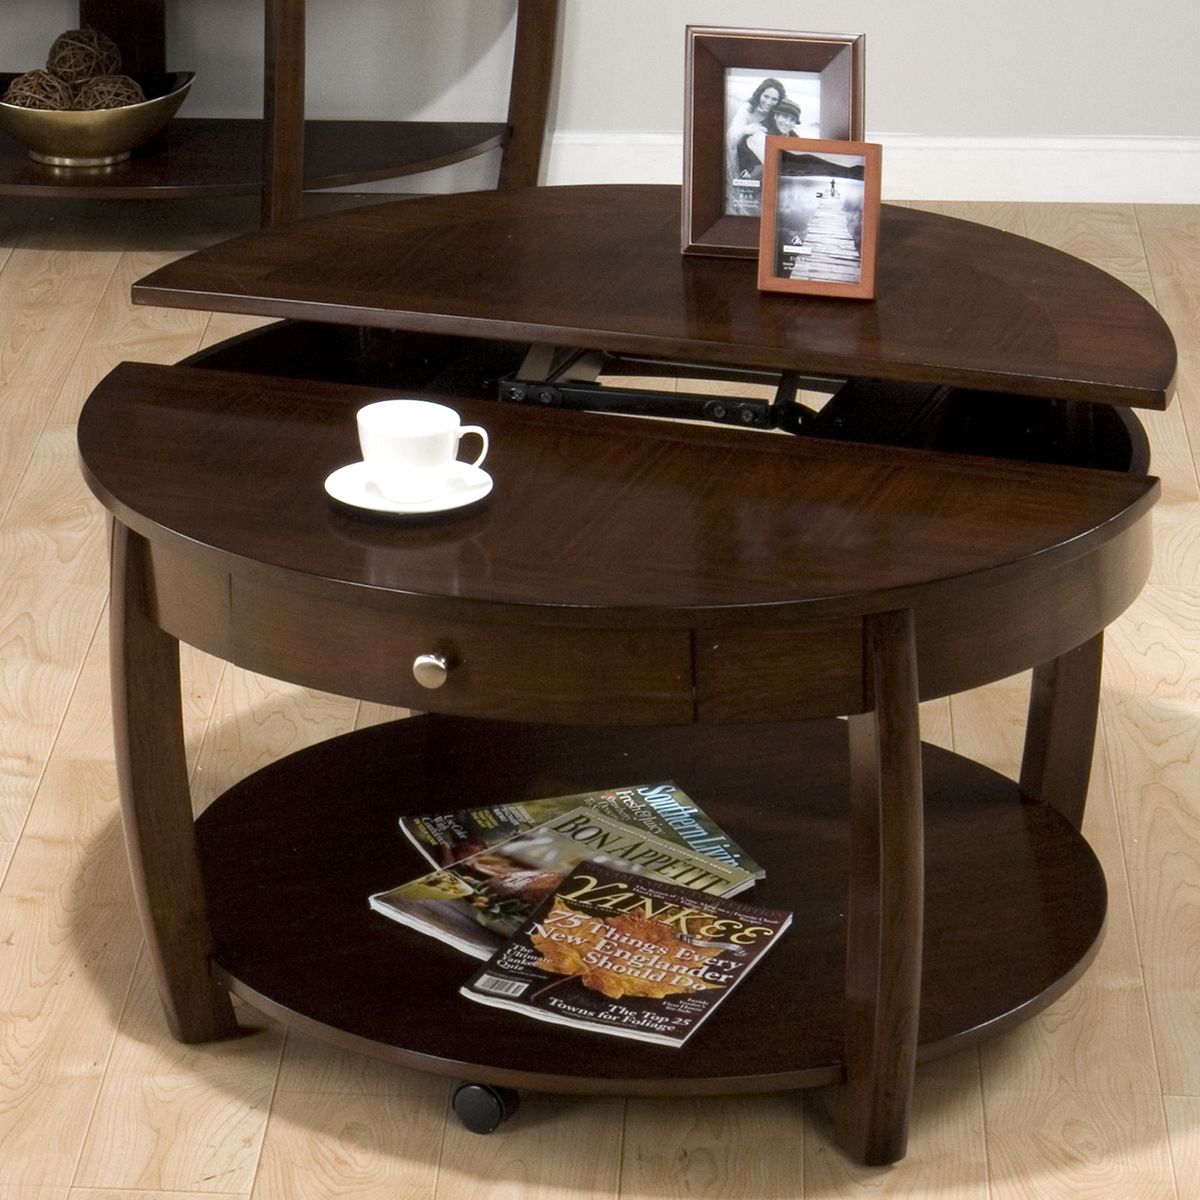 The Round Coffee Tables With Storage – The Simple And Compact Furniture Inside Coffee Tables With Round Wooden Tops (View 20 of 20)